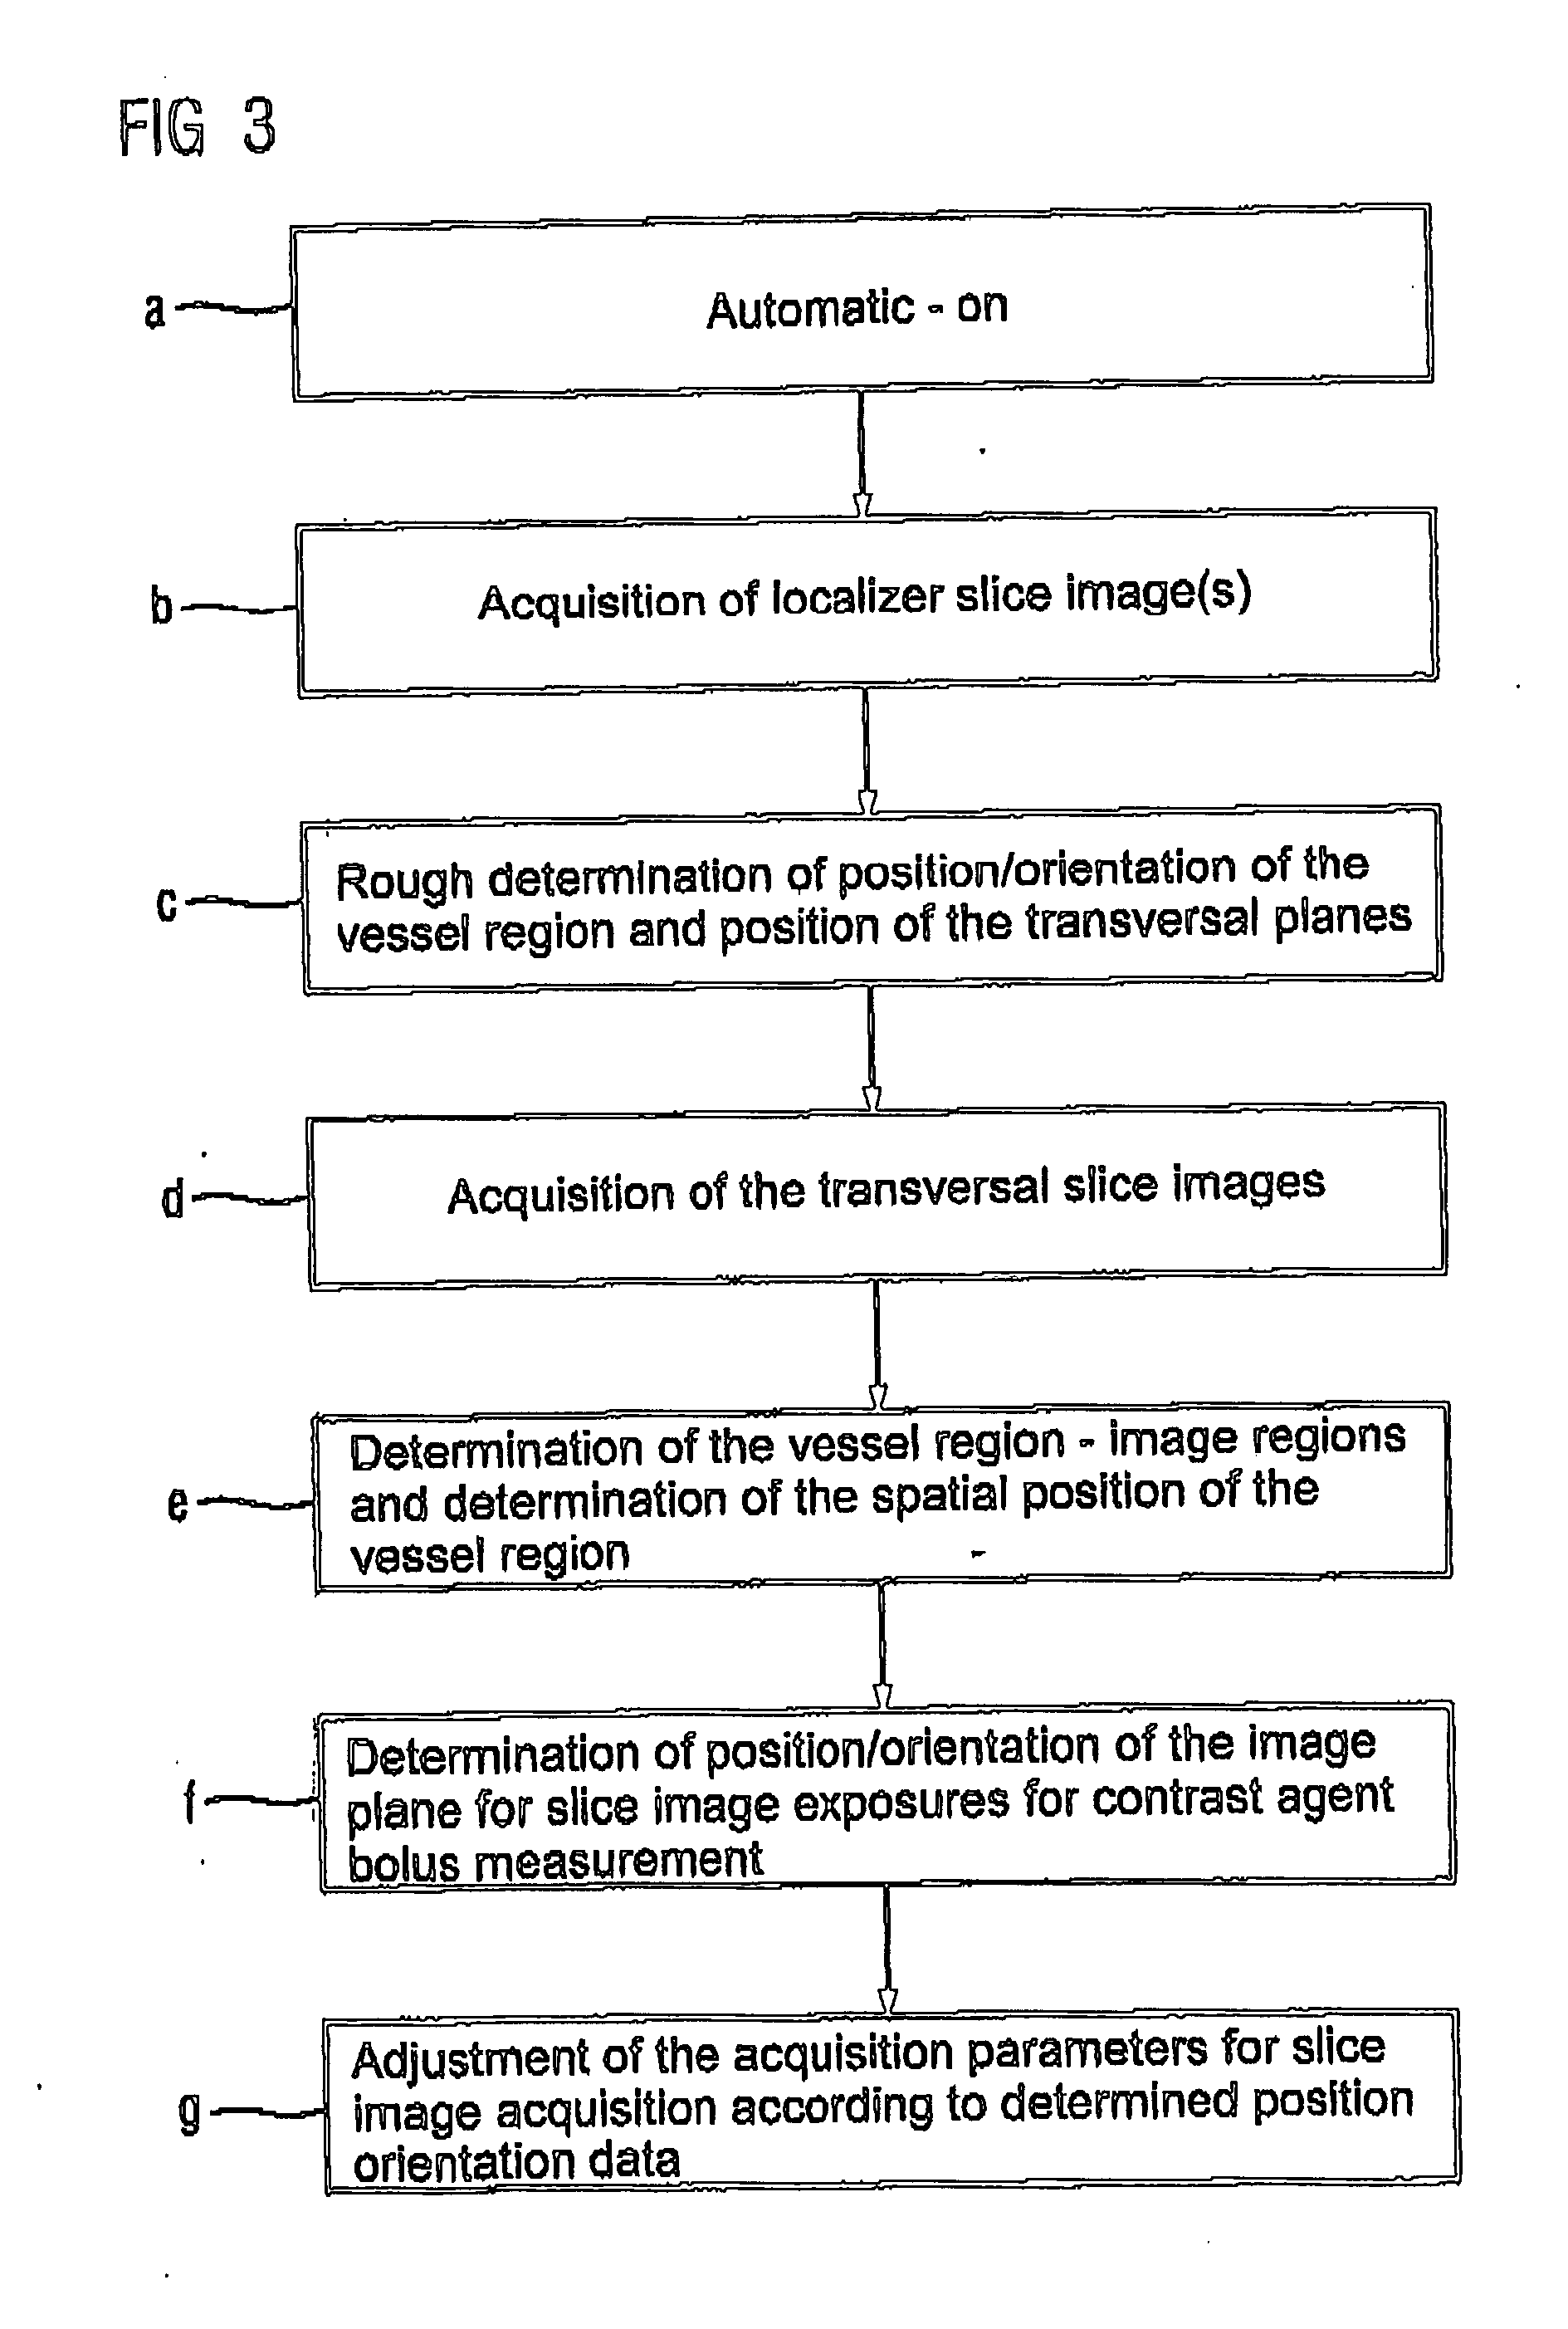 Magnetic resonance method and apparatus for determining the position and/or orientation of the image plane of slice image exposures of a vessel region in a contrast agent bolus examination